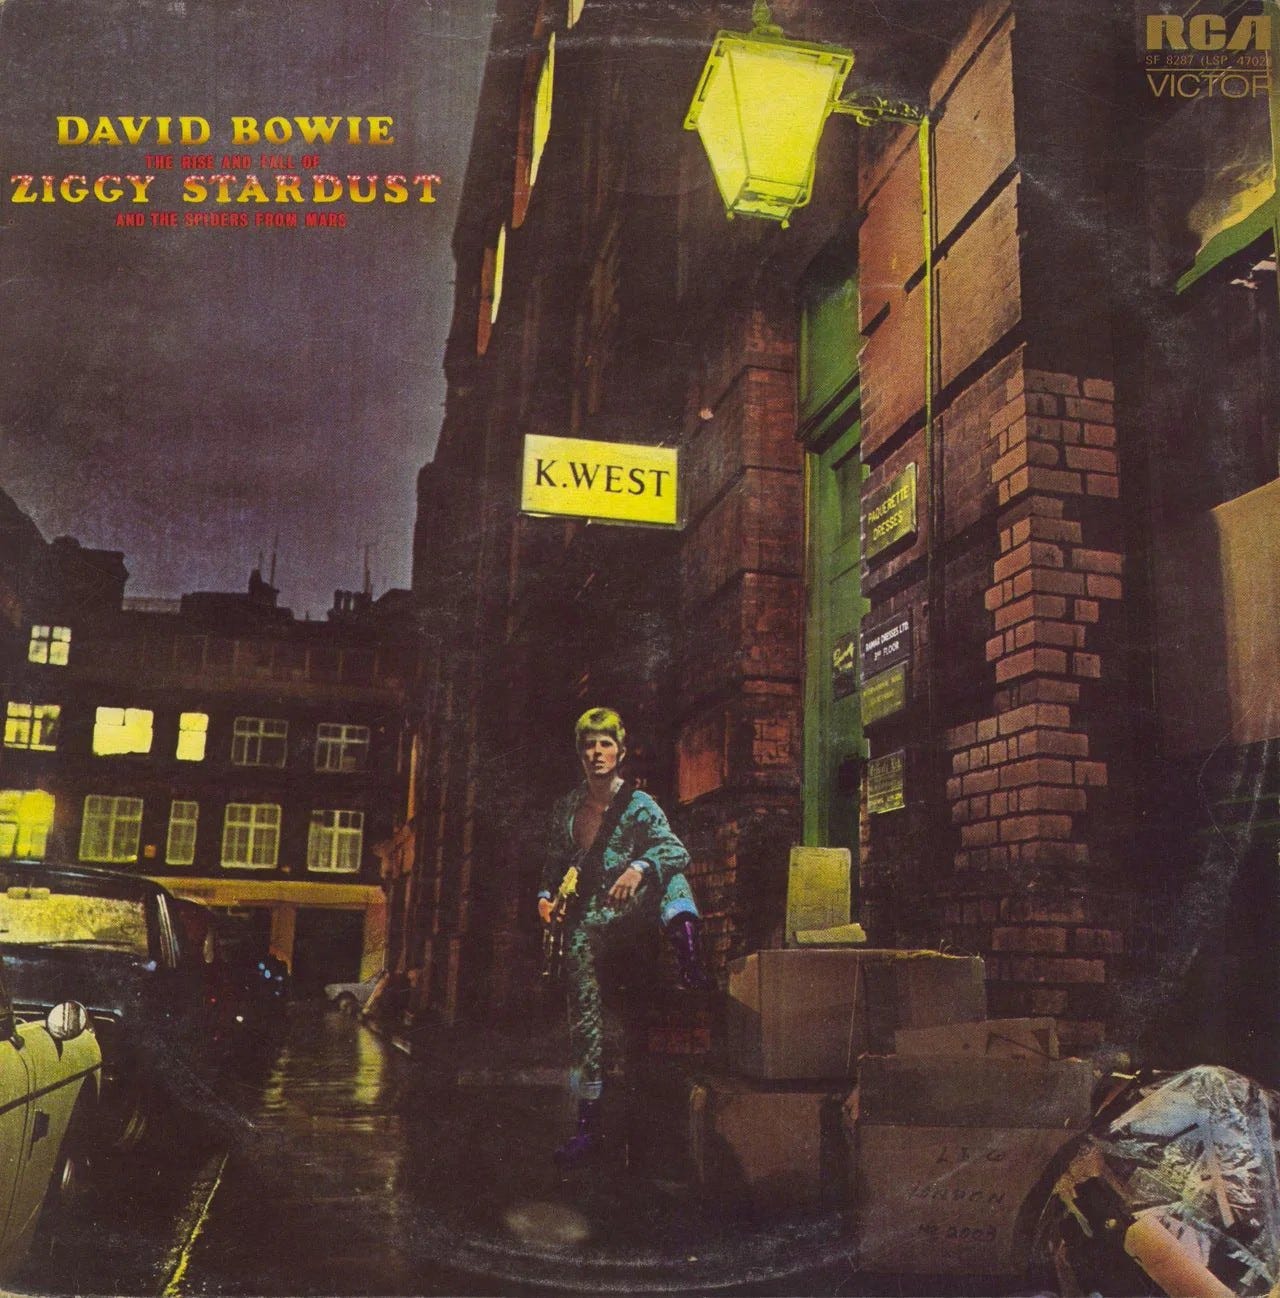 Cover of 'The Rise of Ziggy Stardust and the Spiders from Mars' by David Bowie